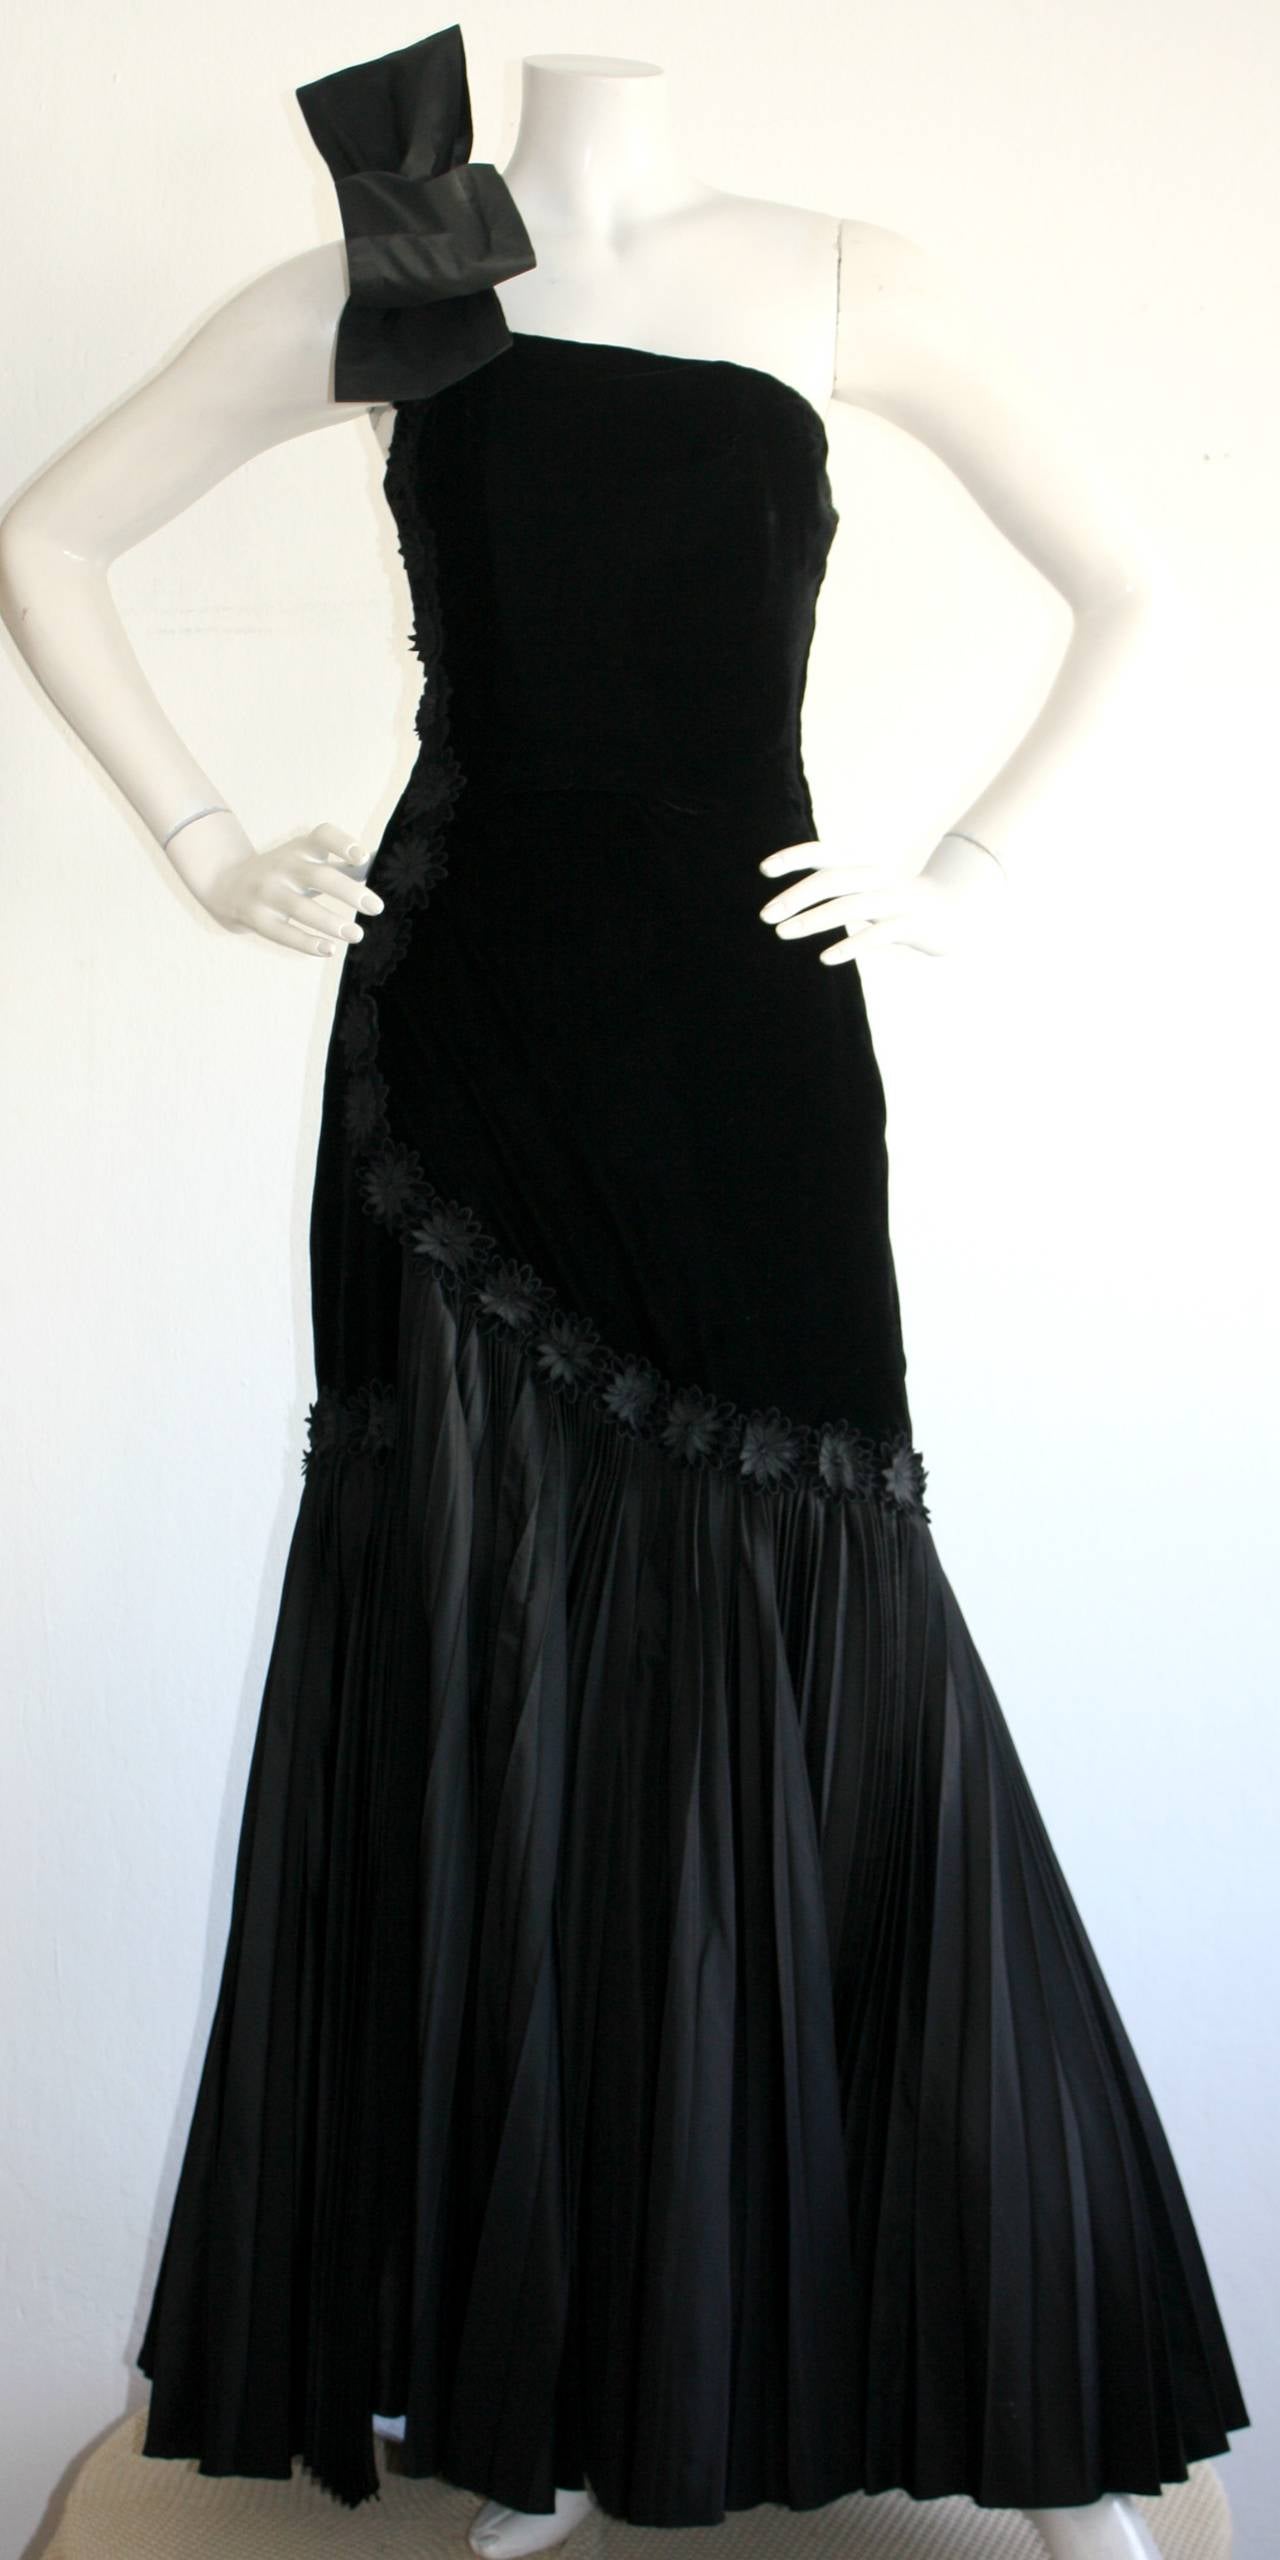 Stunning vintage 1940s black silk velvet one shoulder gown, with bow at top shoulder. Intricate black flower embroidery throughout. Beautiful asymmetrical accordion hemline, that makes for dramatic movement. A true beauty of a gown! In great